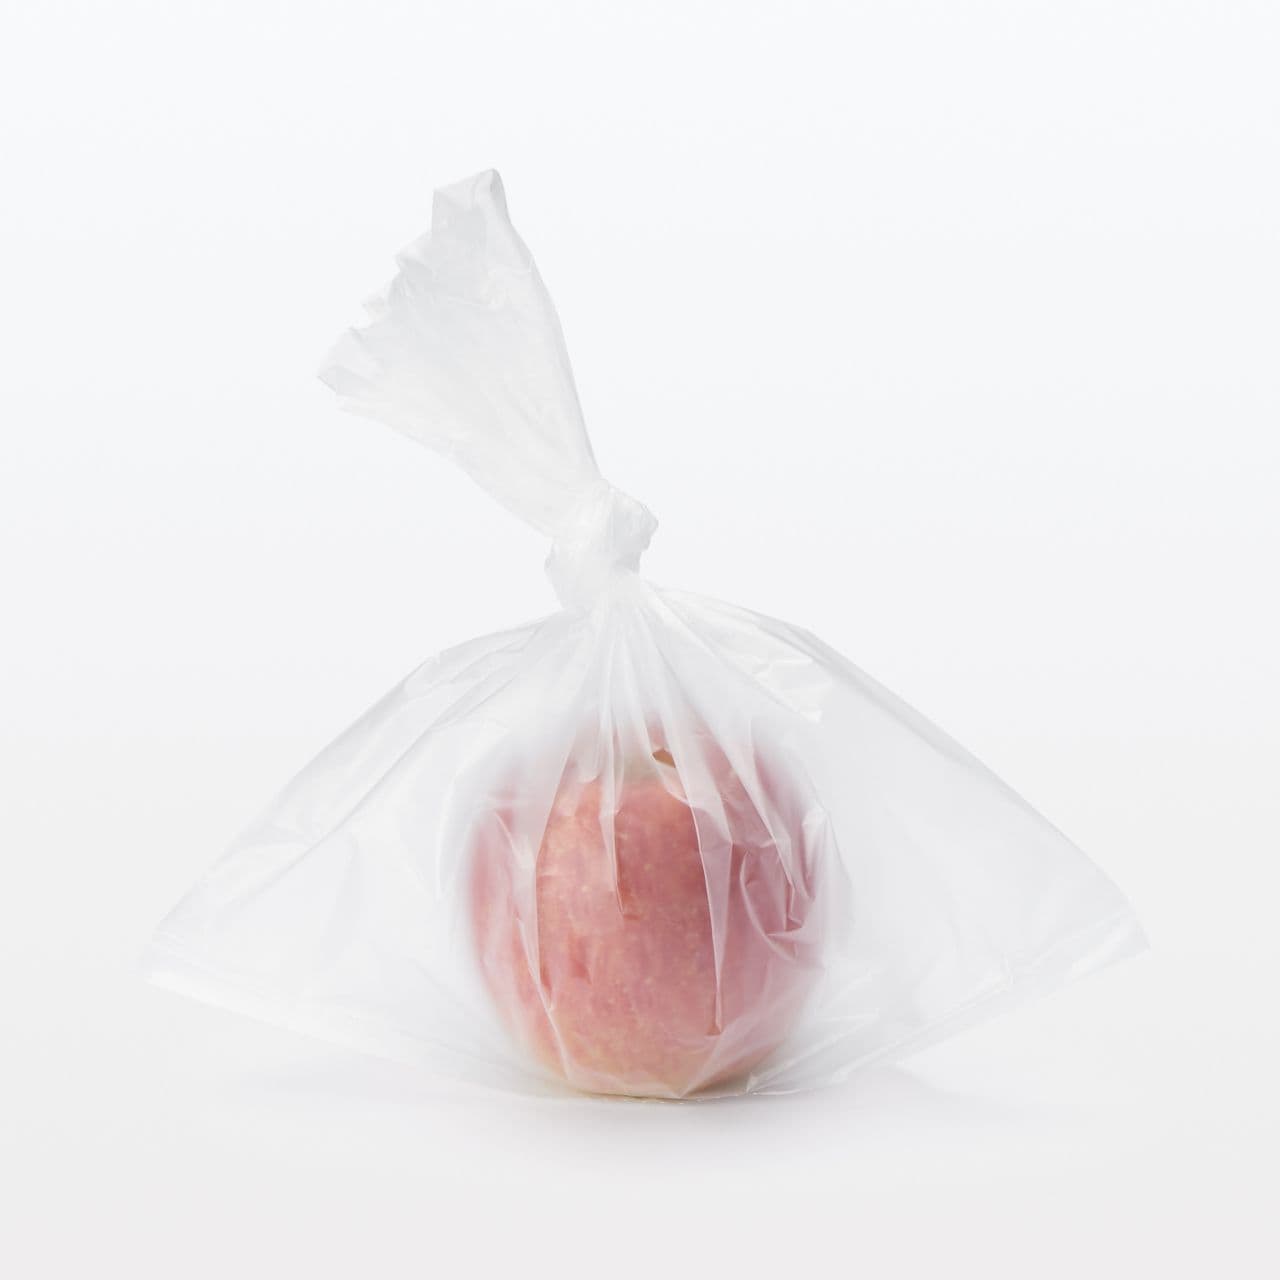 MUJI "Polyethylene bags that can be used for cooking in hot water